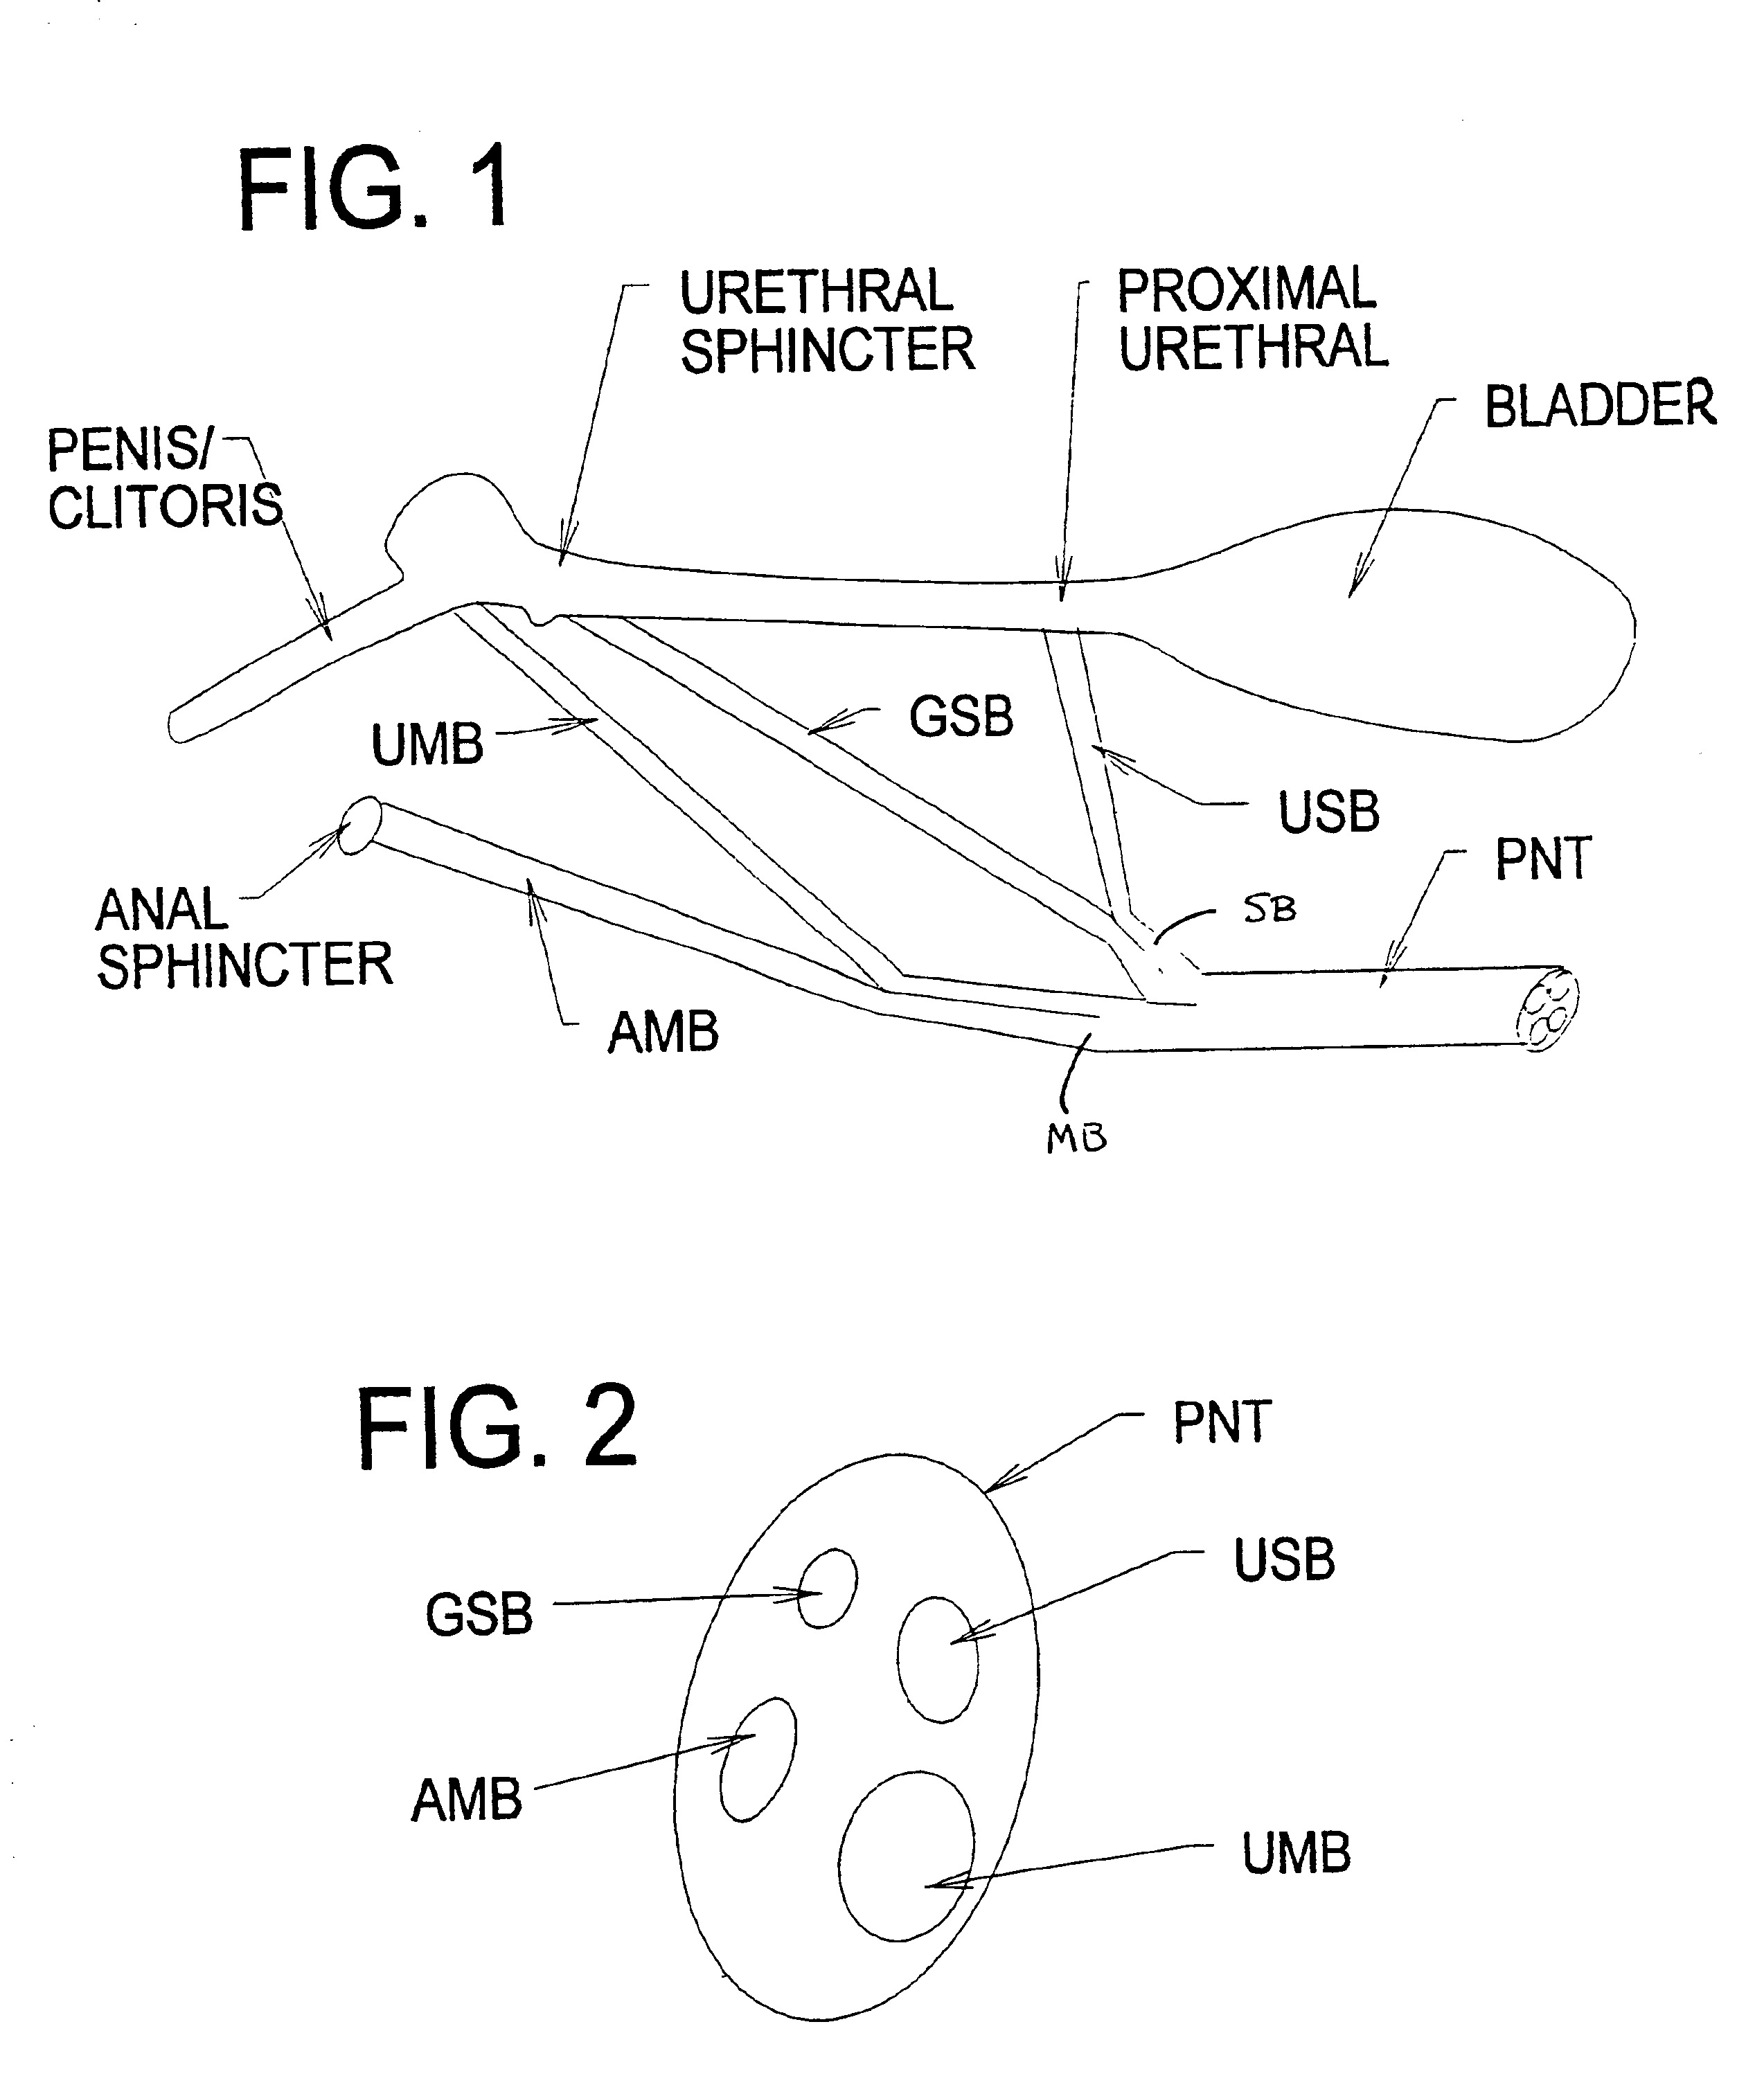 Systems and methods for selectively stimulating components in, on, or near the pudendal nerve or its branches to achieve selective physiologic responses